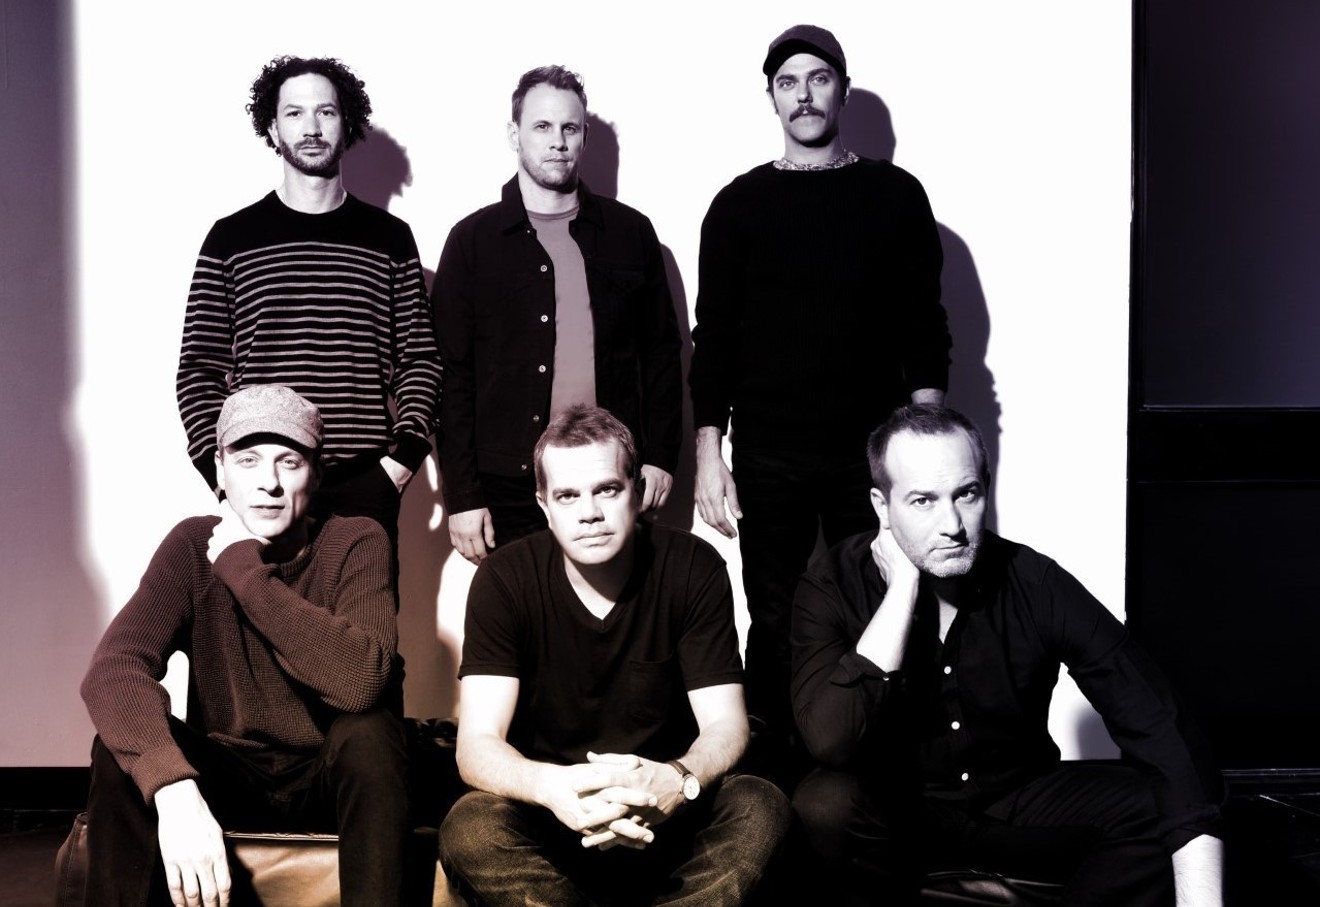 Umphrey's McGee will play a three-day stand at Red Rocks.